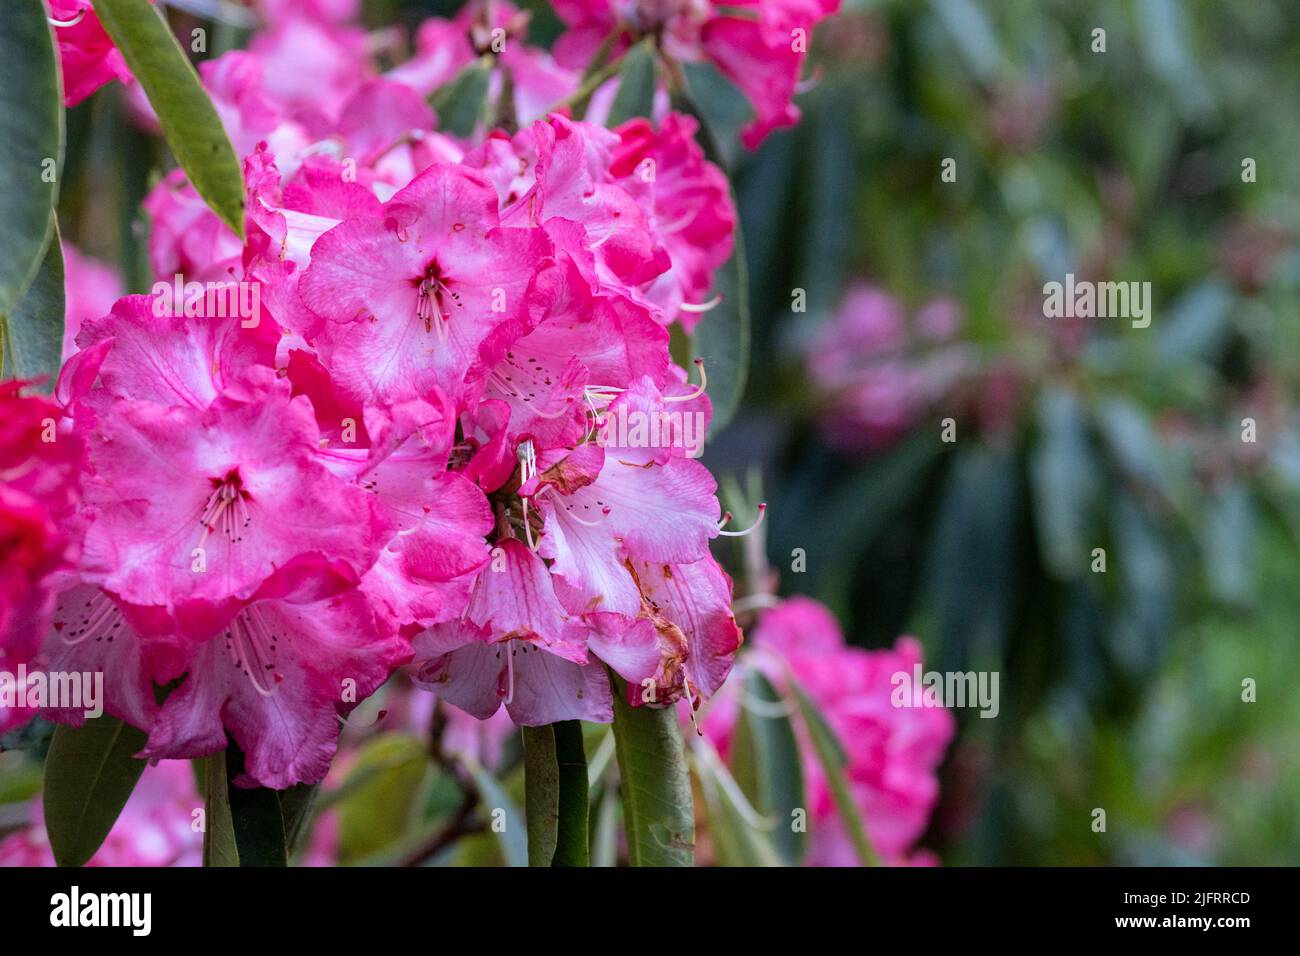 Rhododendron Glory of Penjerrick growing in a garden in Cornwall Stock Photo